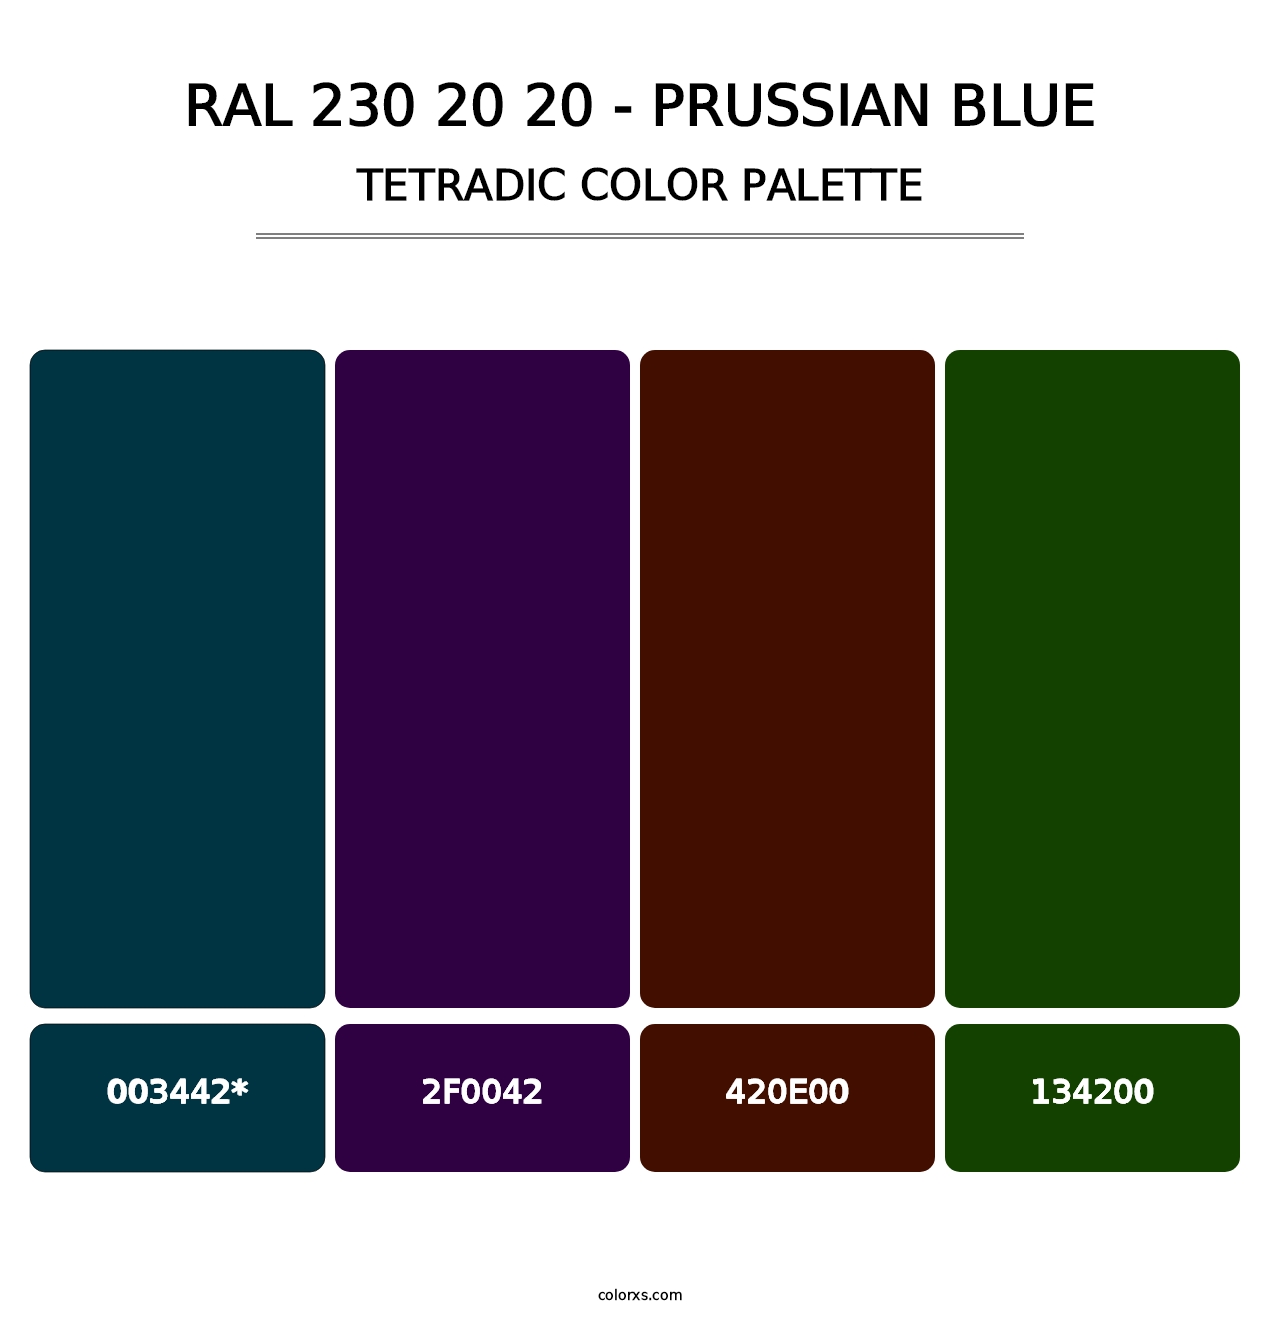 RAL 230 20 20 - Prussian Blue - Tetradic Color Palette